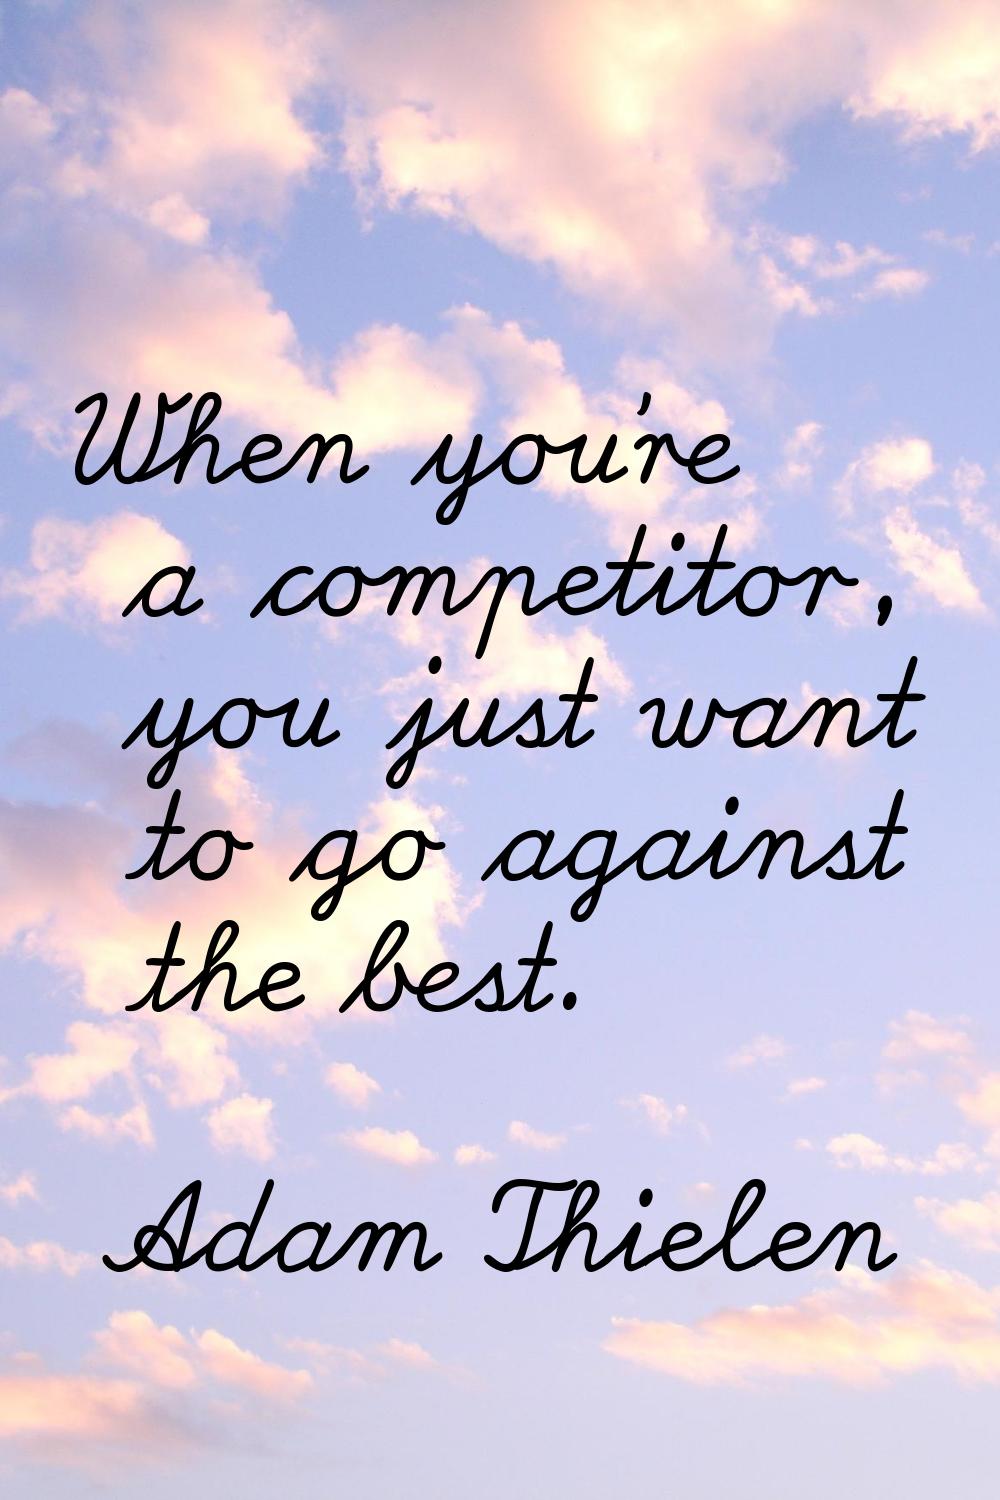 When you're a competitor, you just want to go against the best.